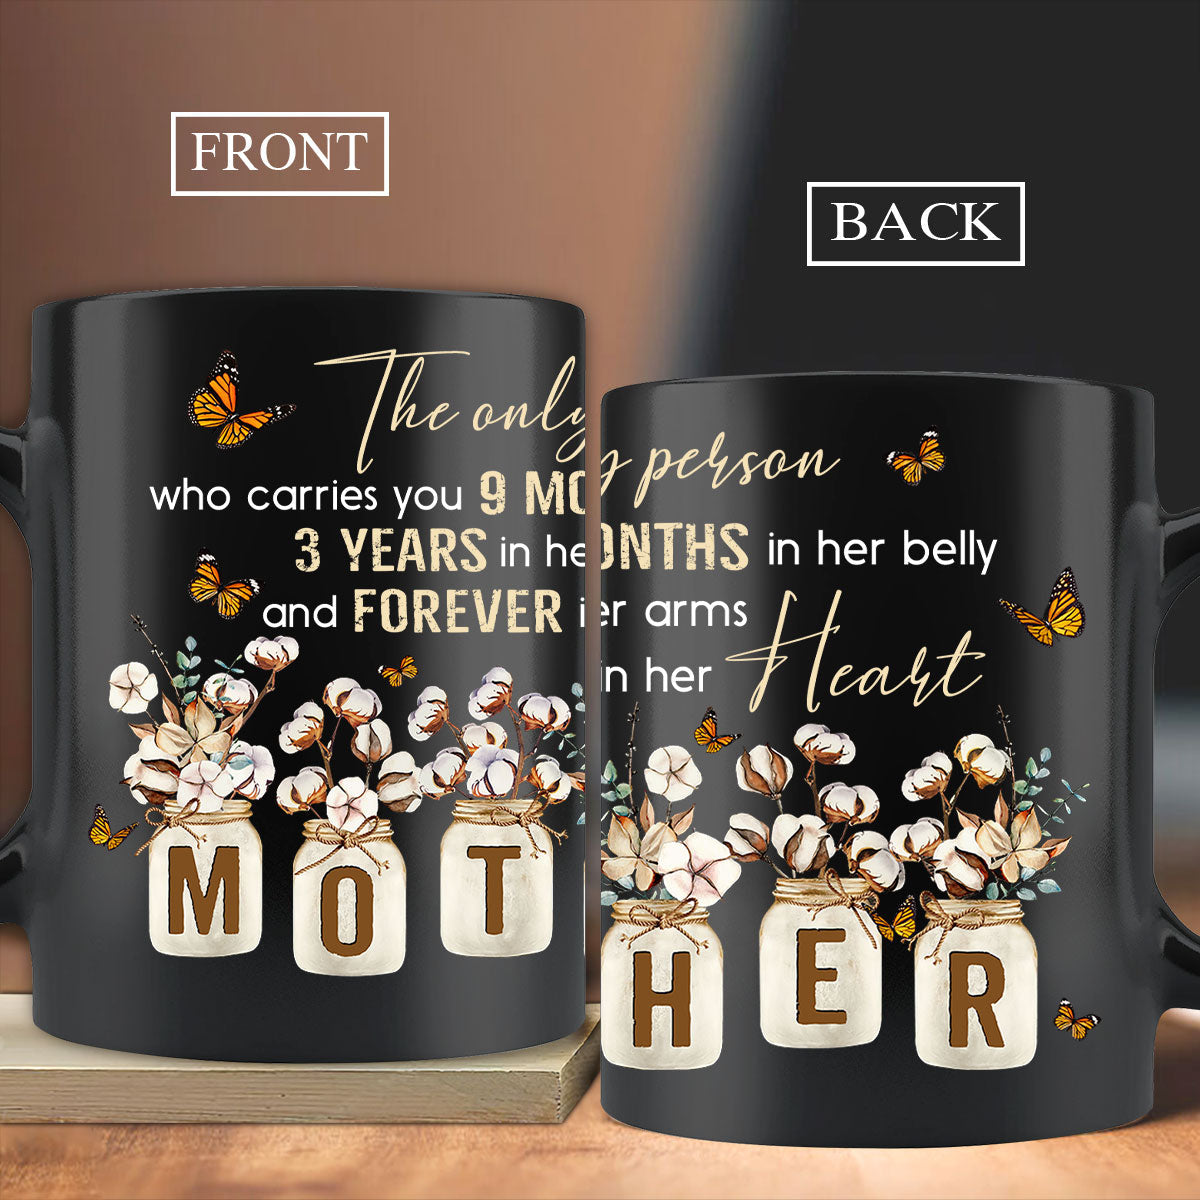 Gift For Mom Mug - Daughter to mom, Cotton flower, Mason jar, Monarch butterfly Mug, The only person Mug - Gift For Mother's Day, Presents for Mom